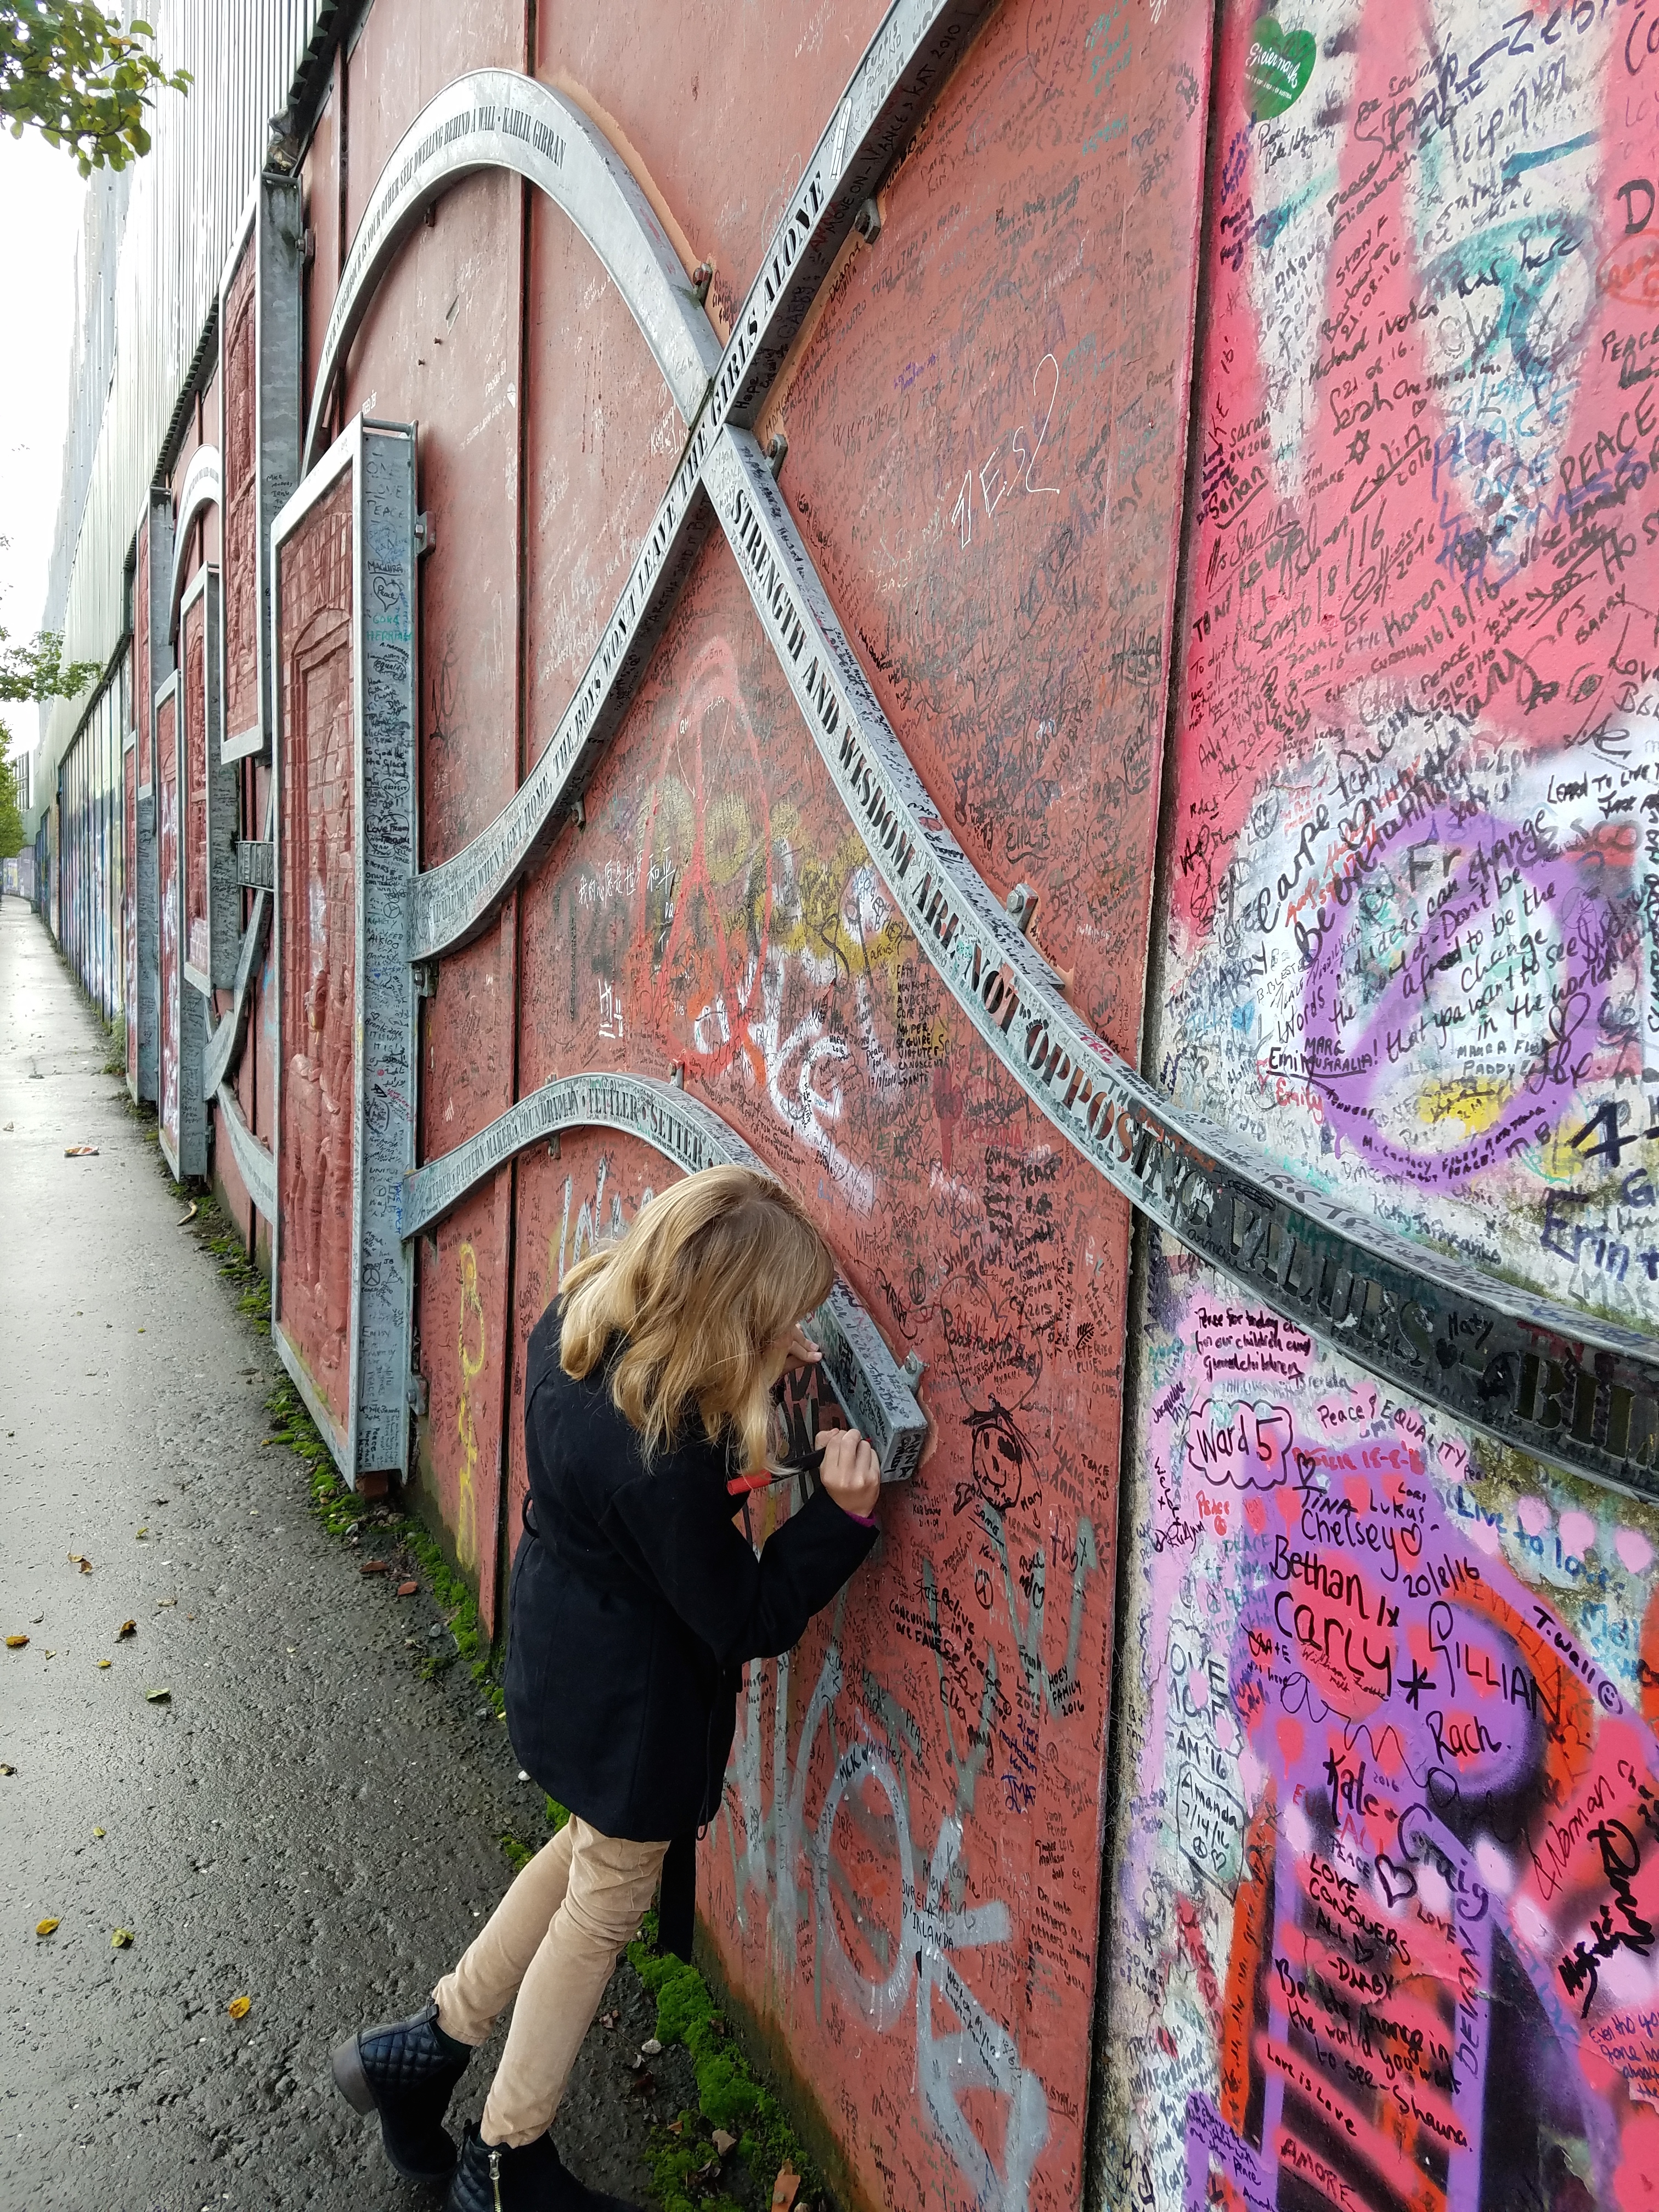 Adding her signature to the peace wall 